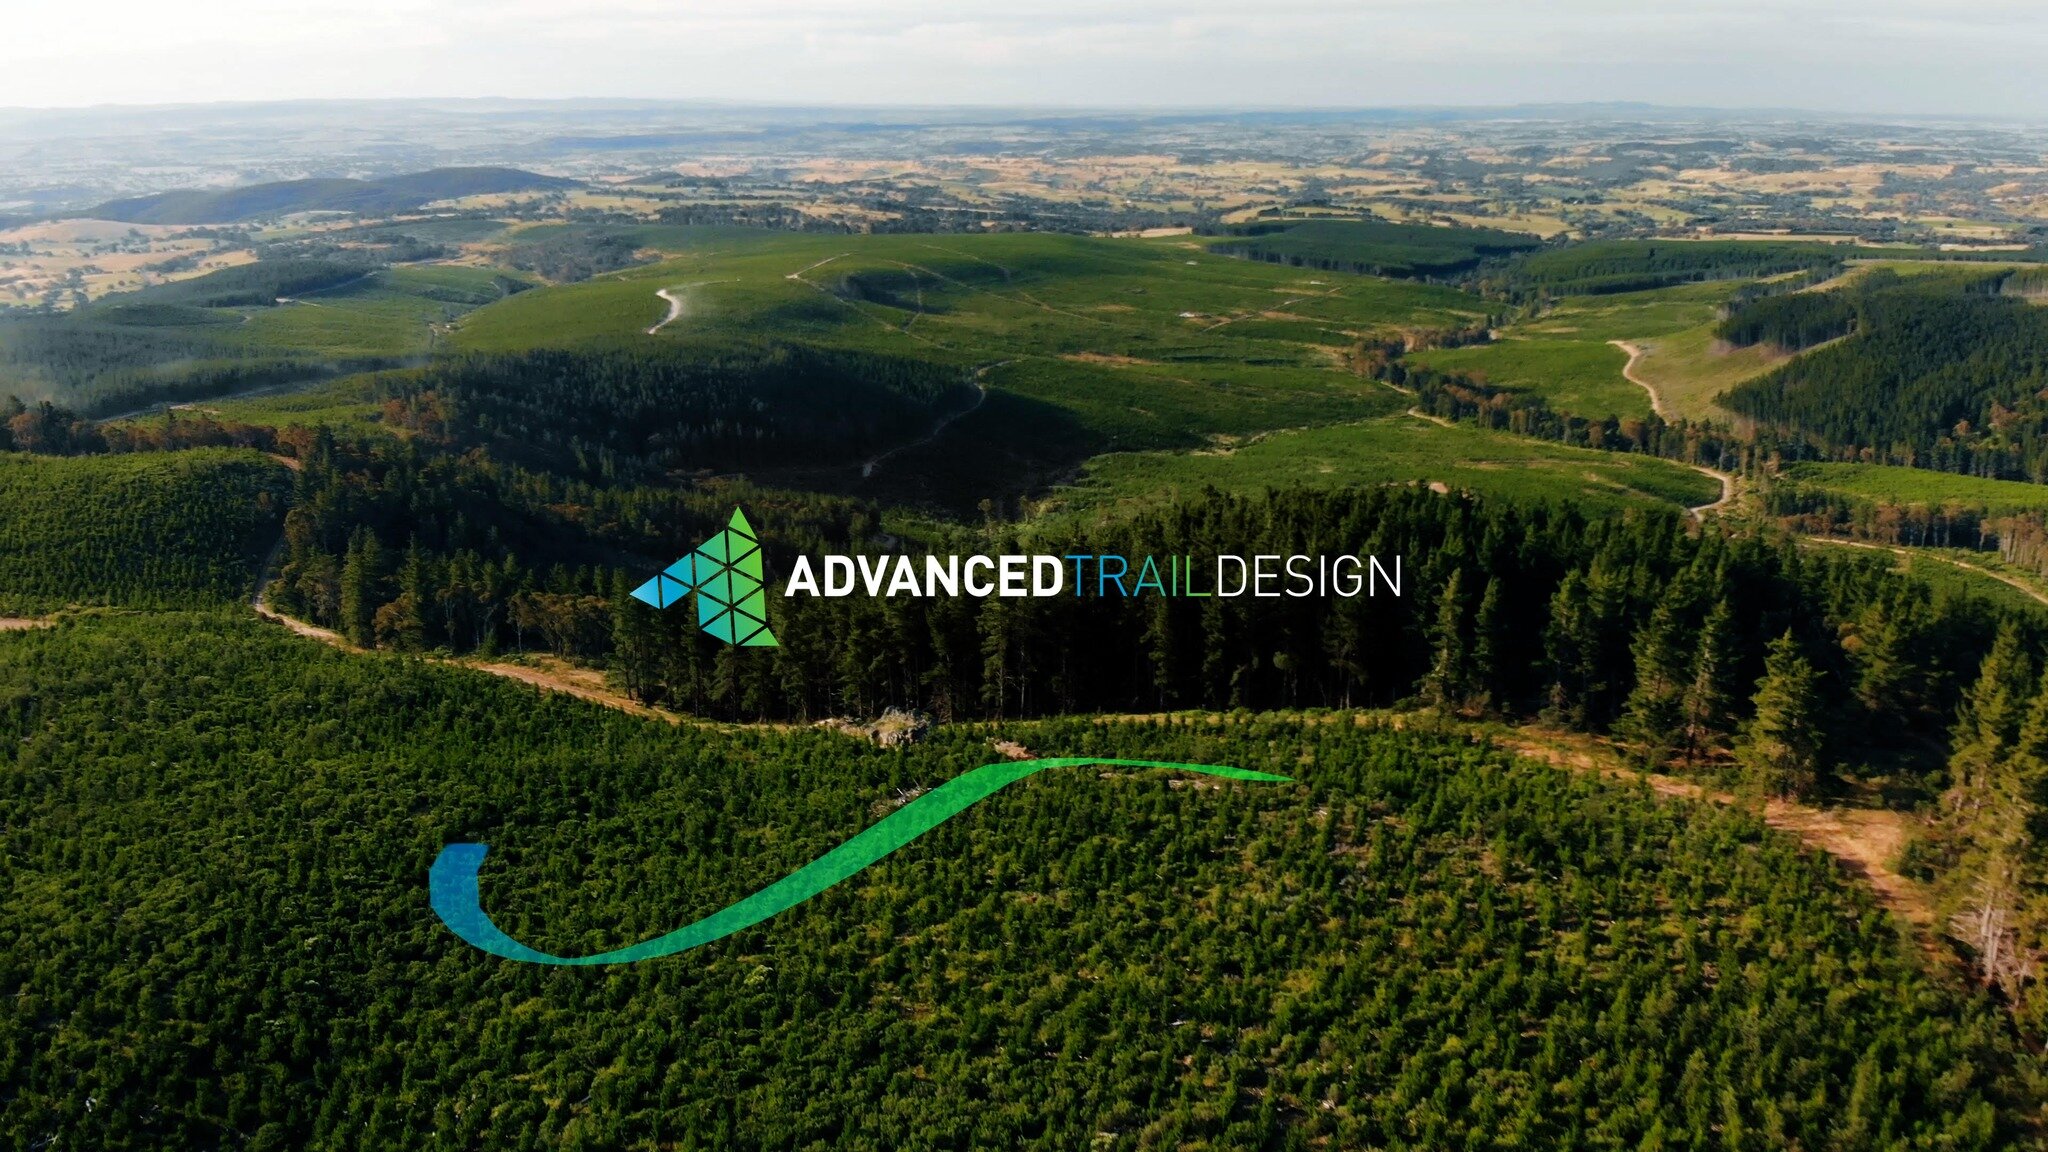 Since its inception, the trail design arm of Advanced CAD has significantly evolved. My dedication to innovative 3D technology remains, yet I've expanded my services to include trail auditing, master planning, and hands-on trail scoping. As such, I'm